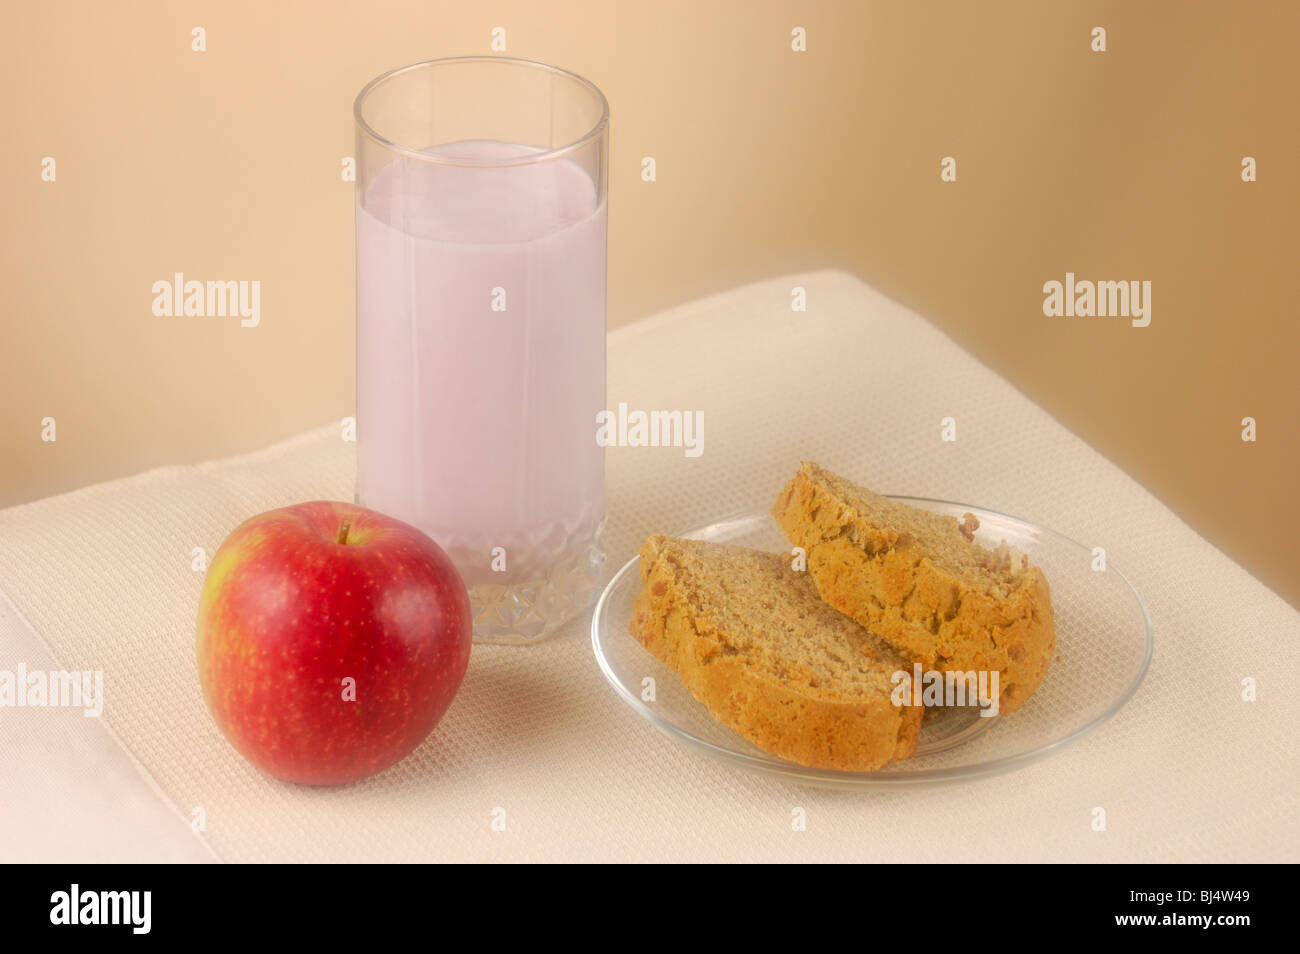 Home made bread, glass of yogurt and an apple Stock Photo